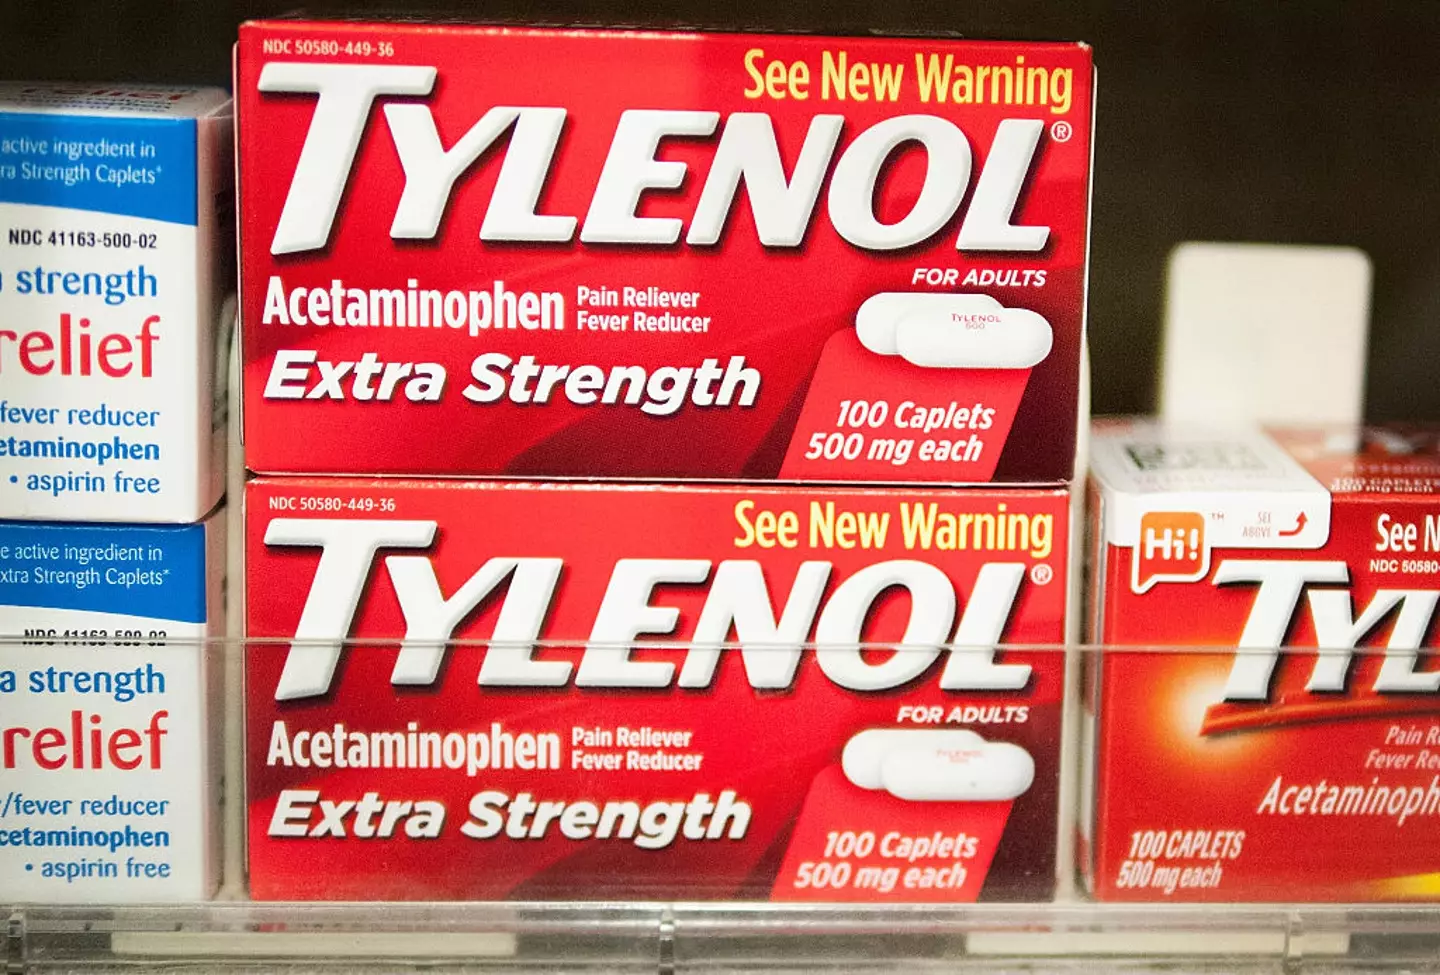 Dr. Dubrow has warned against Tylenol.